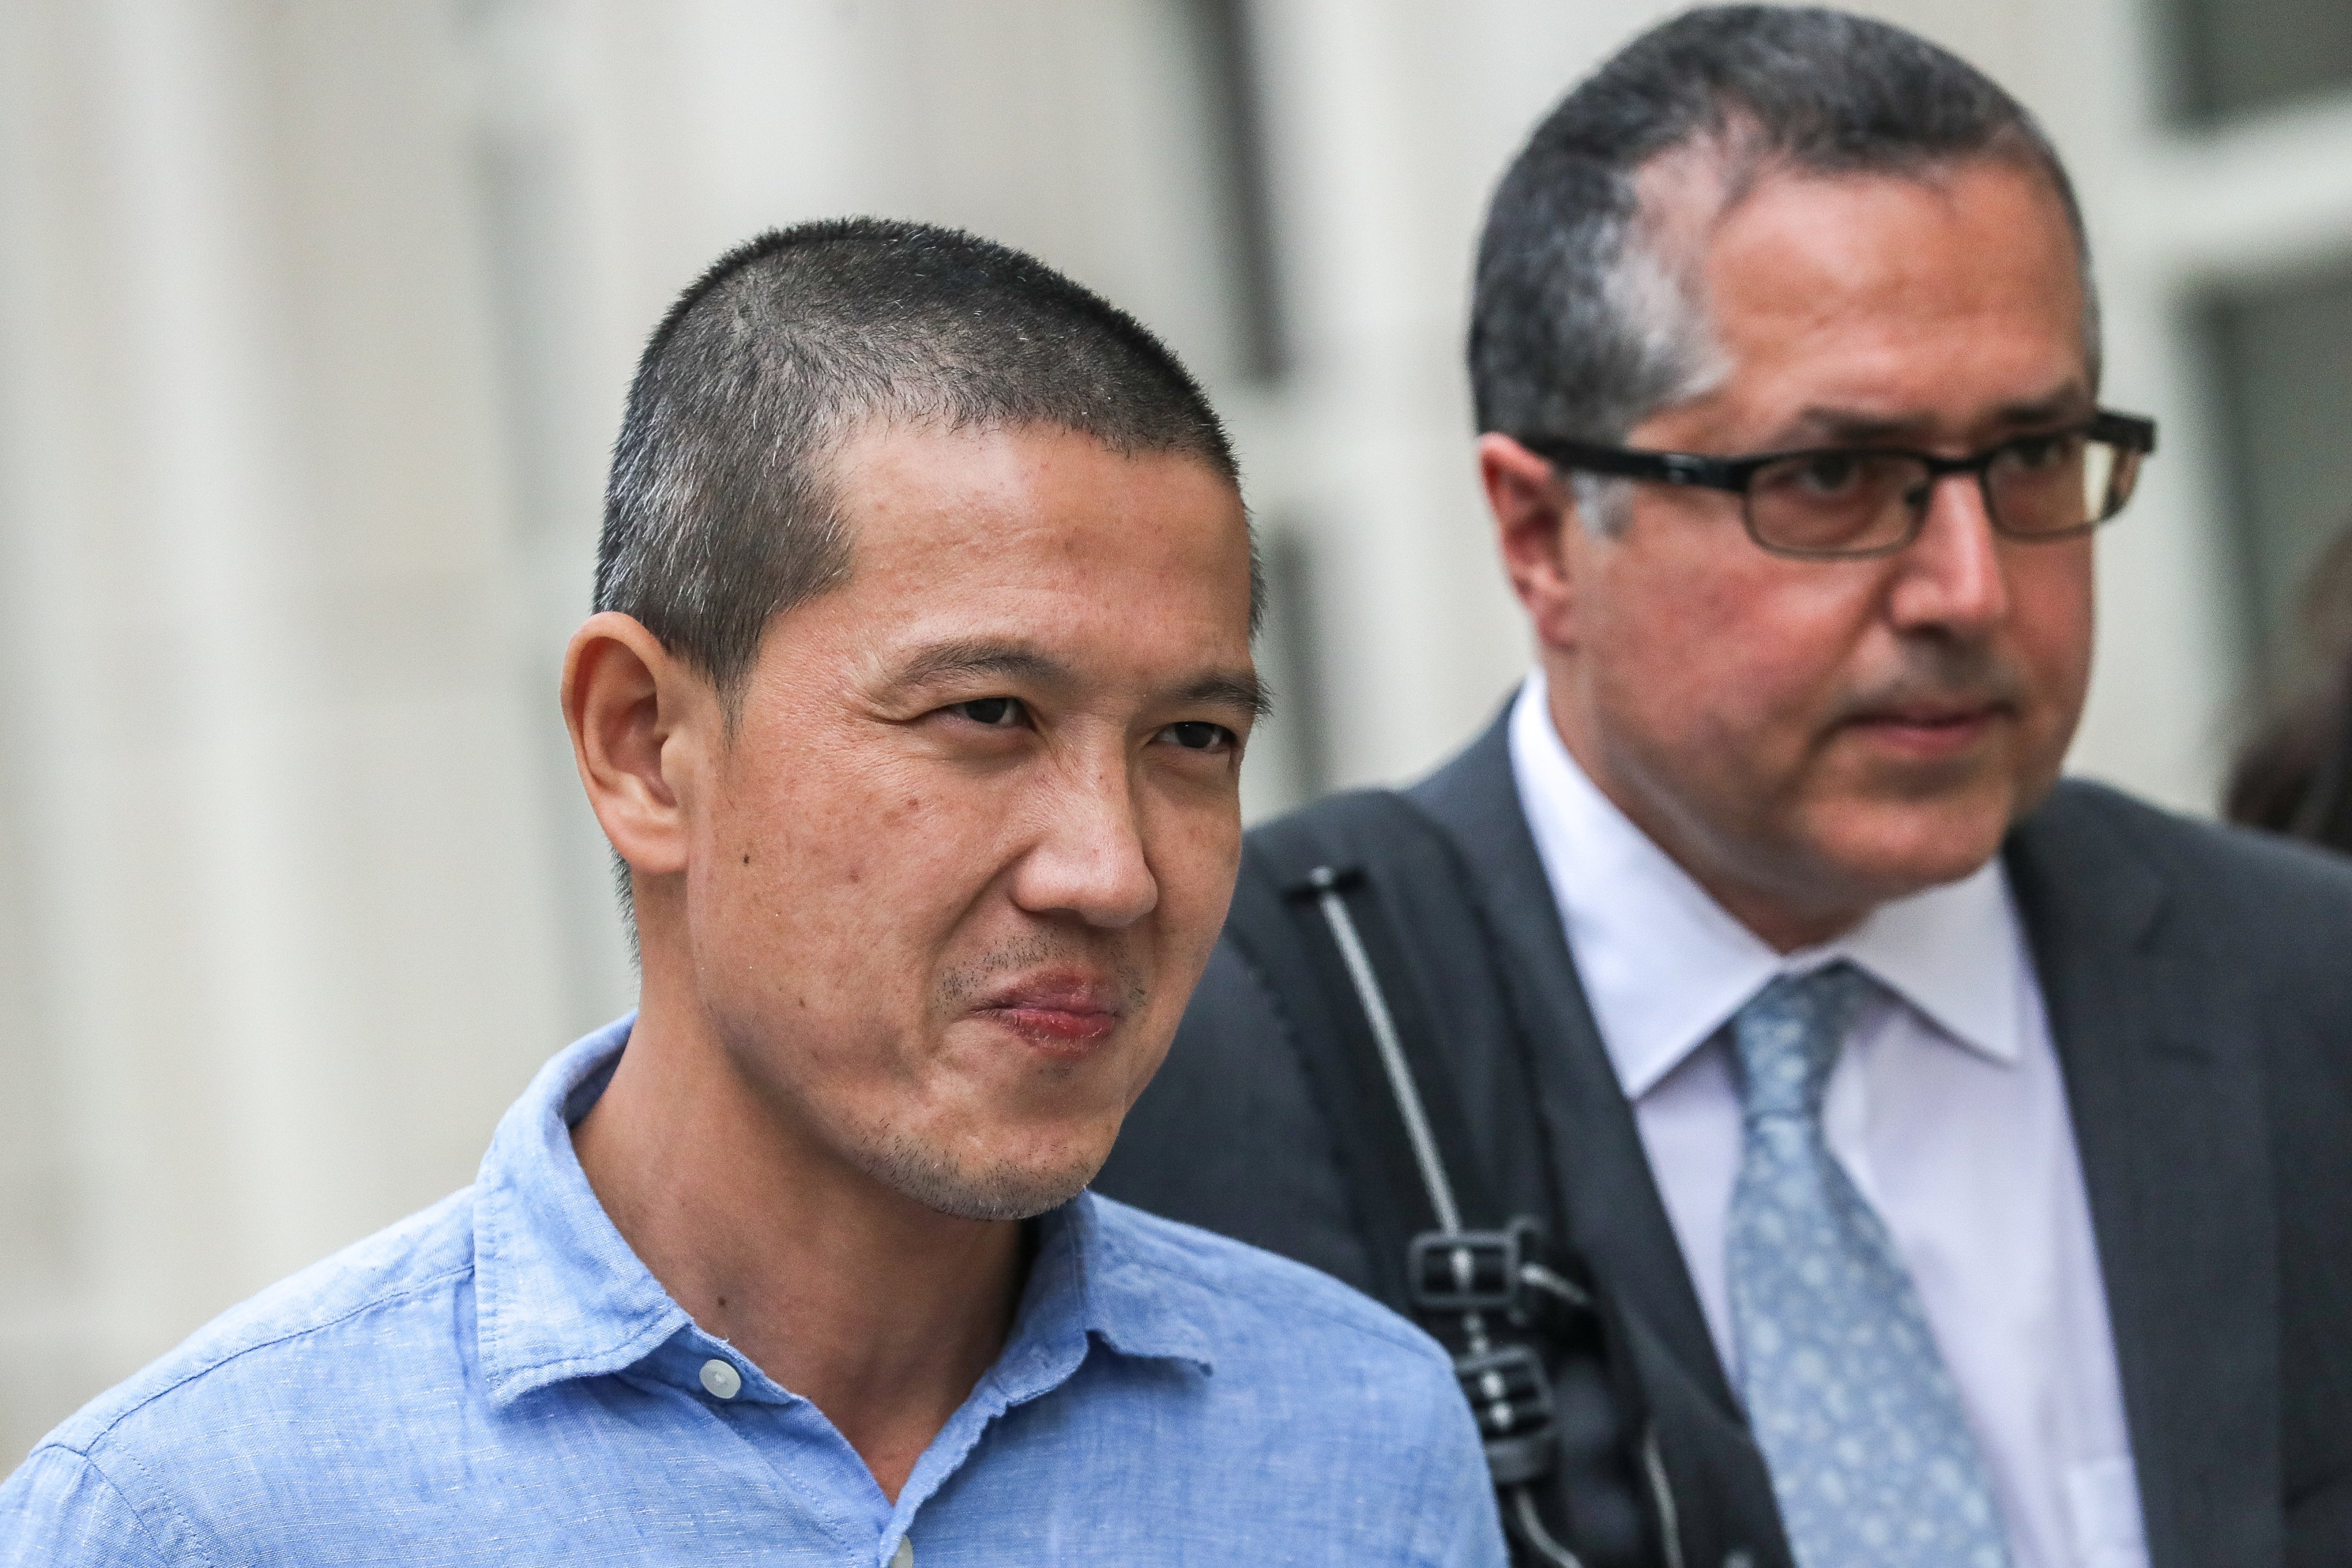 Ex-Goldman Sachs banker Roger Ng has been permanently banned from performing any regulated activity under the Securities and Futures Act (SFA), according to the Monetary Authority of Singapore. Photo: Reuters